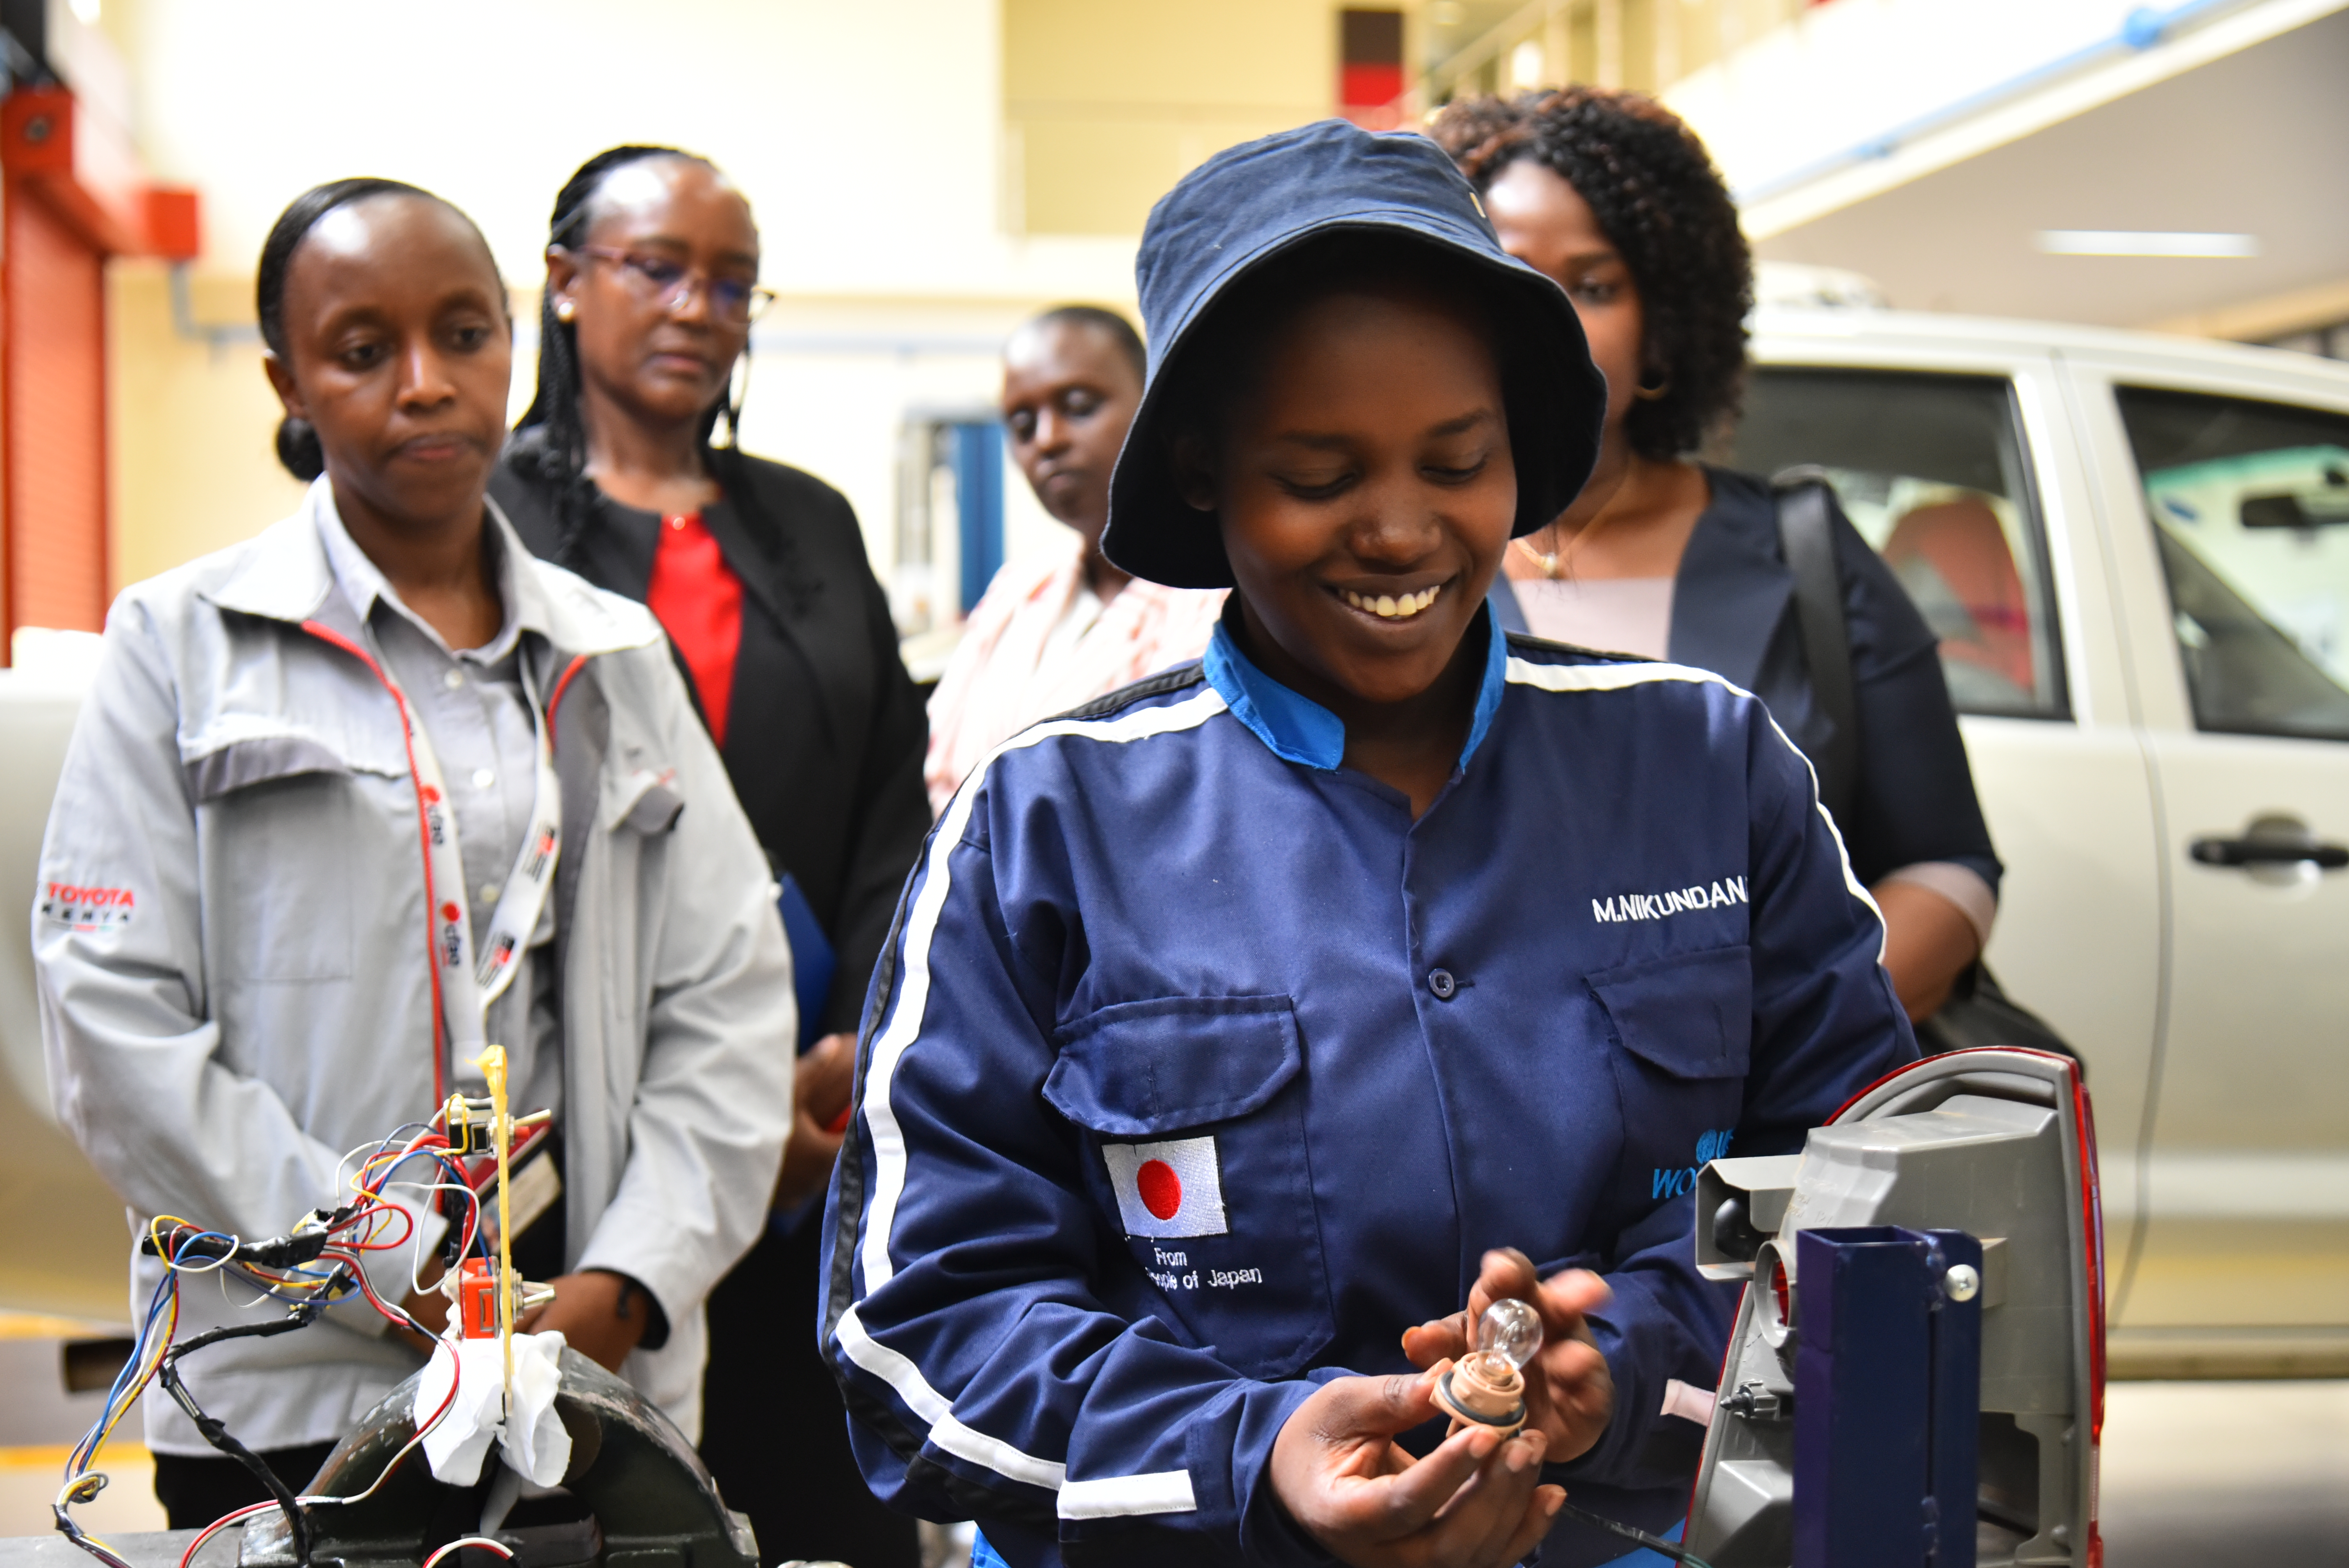 Micheline Nikundana, from Burundi, is one of 30 students participating in the new auto-motive training course at the Toyota Foundation Academy in Nairobi